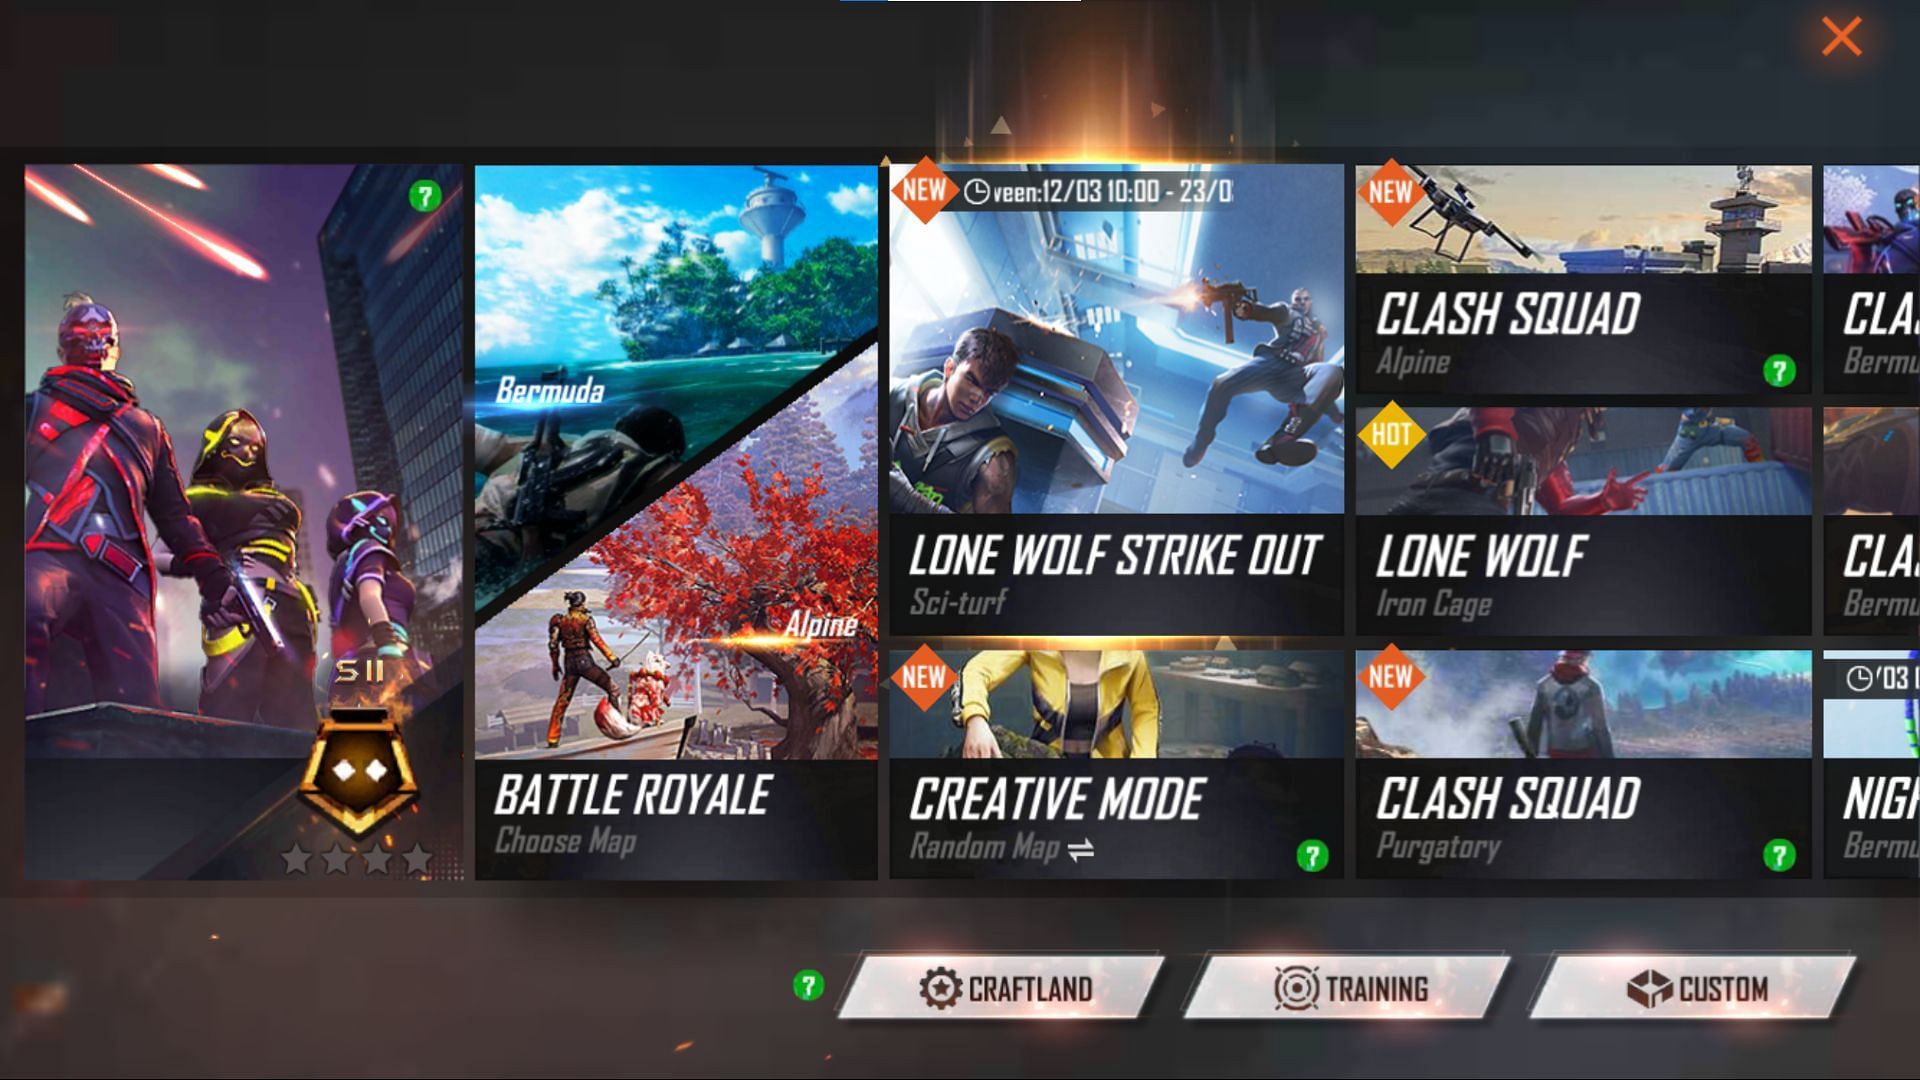 Users will have to select this specific event (Image via Garena)